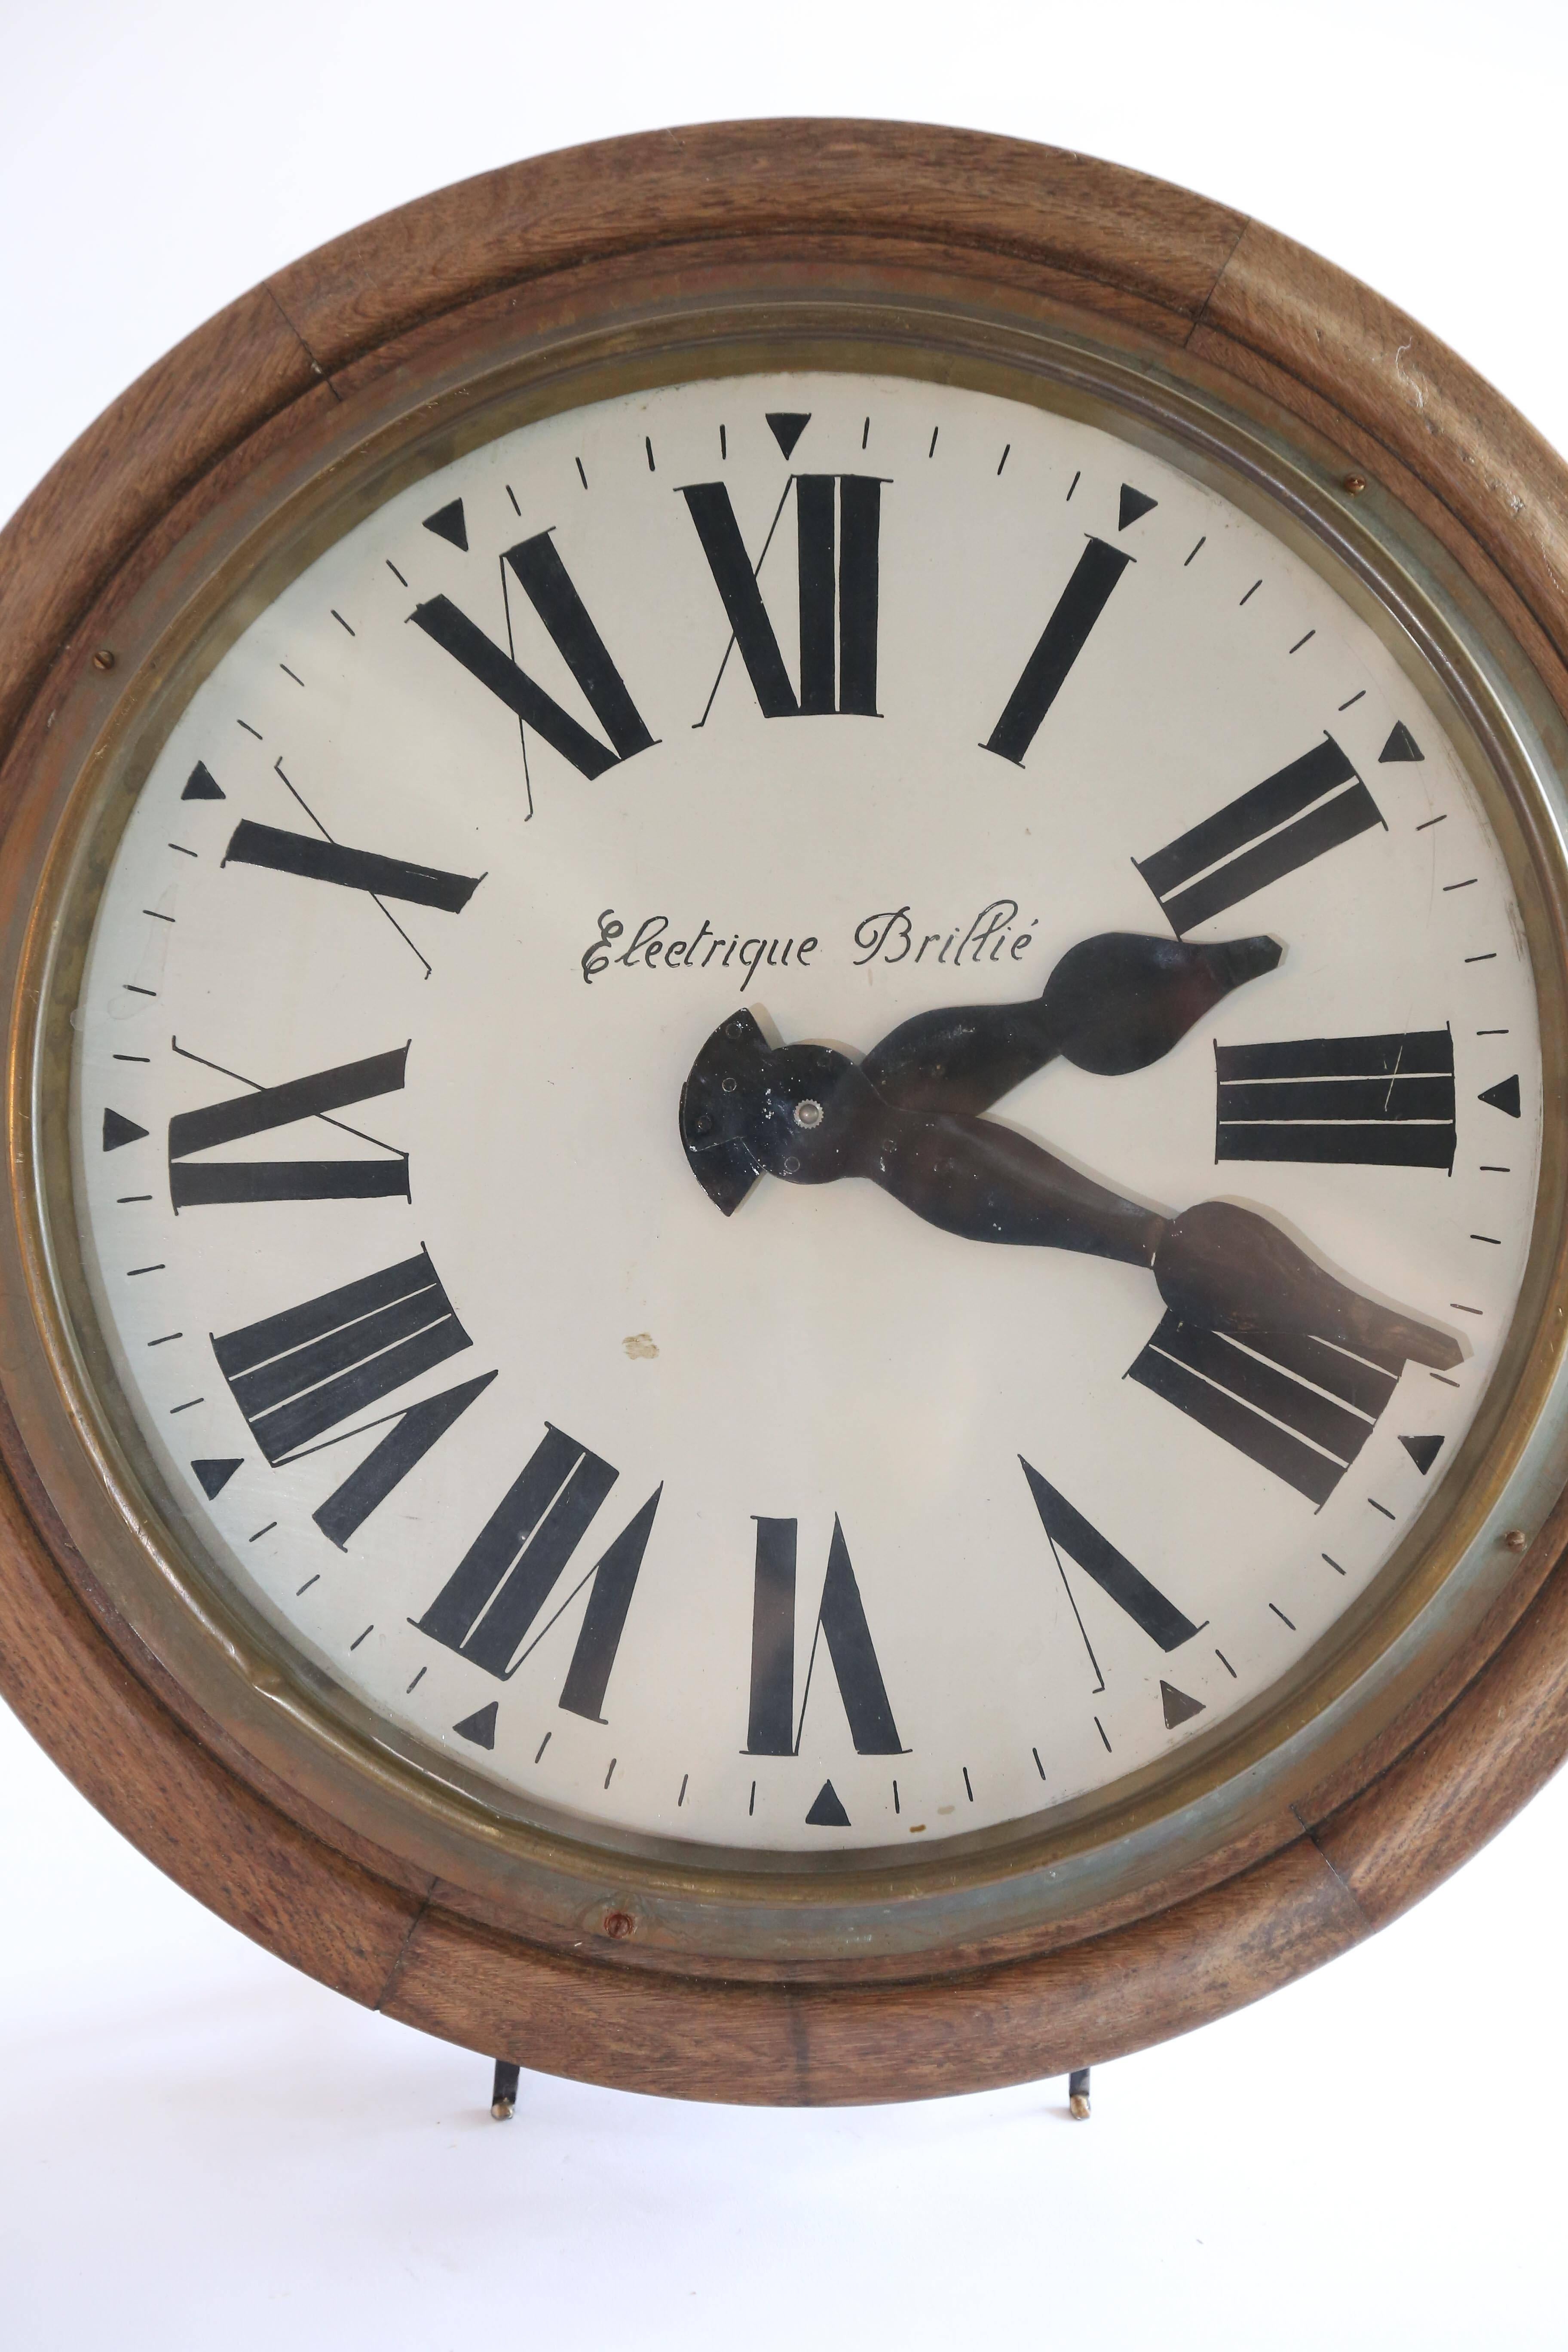 An iconic Electrique Brillie wall clock. This original French factory clock was manufactured by Brillié in the 1930's. With a body of sectioned oak, it has a white painted face with bold black Roman numerals and equally bold black steel hands